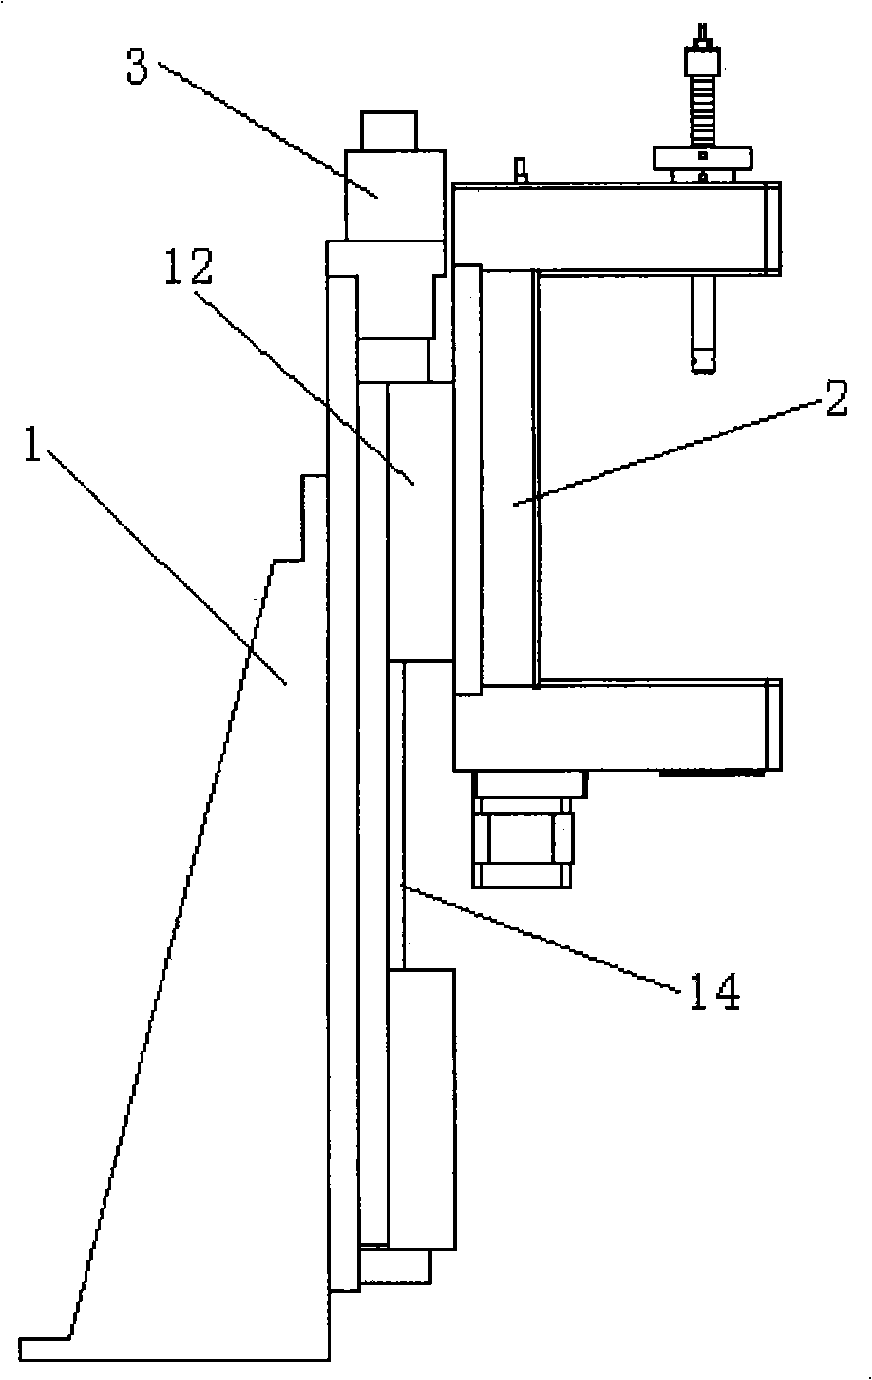 Objective table of multi-mode imaging system